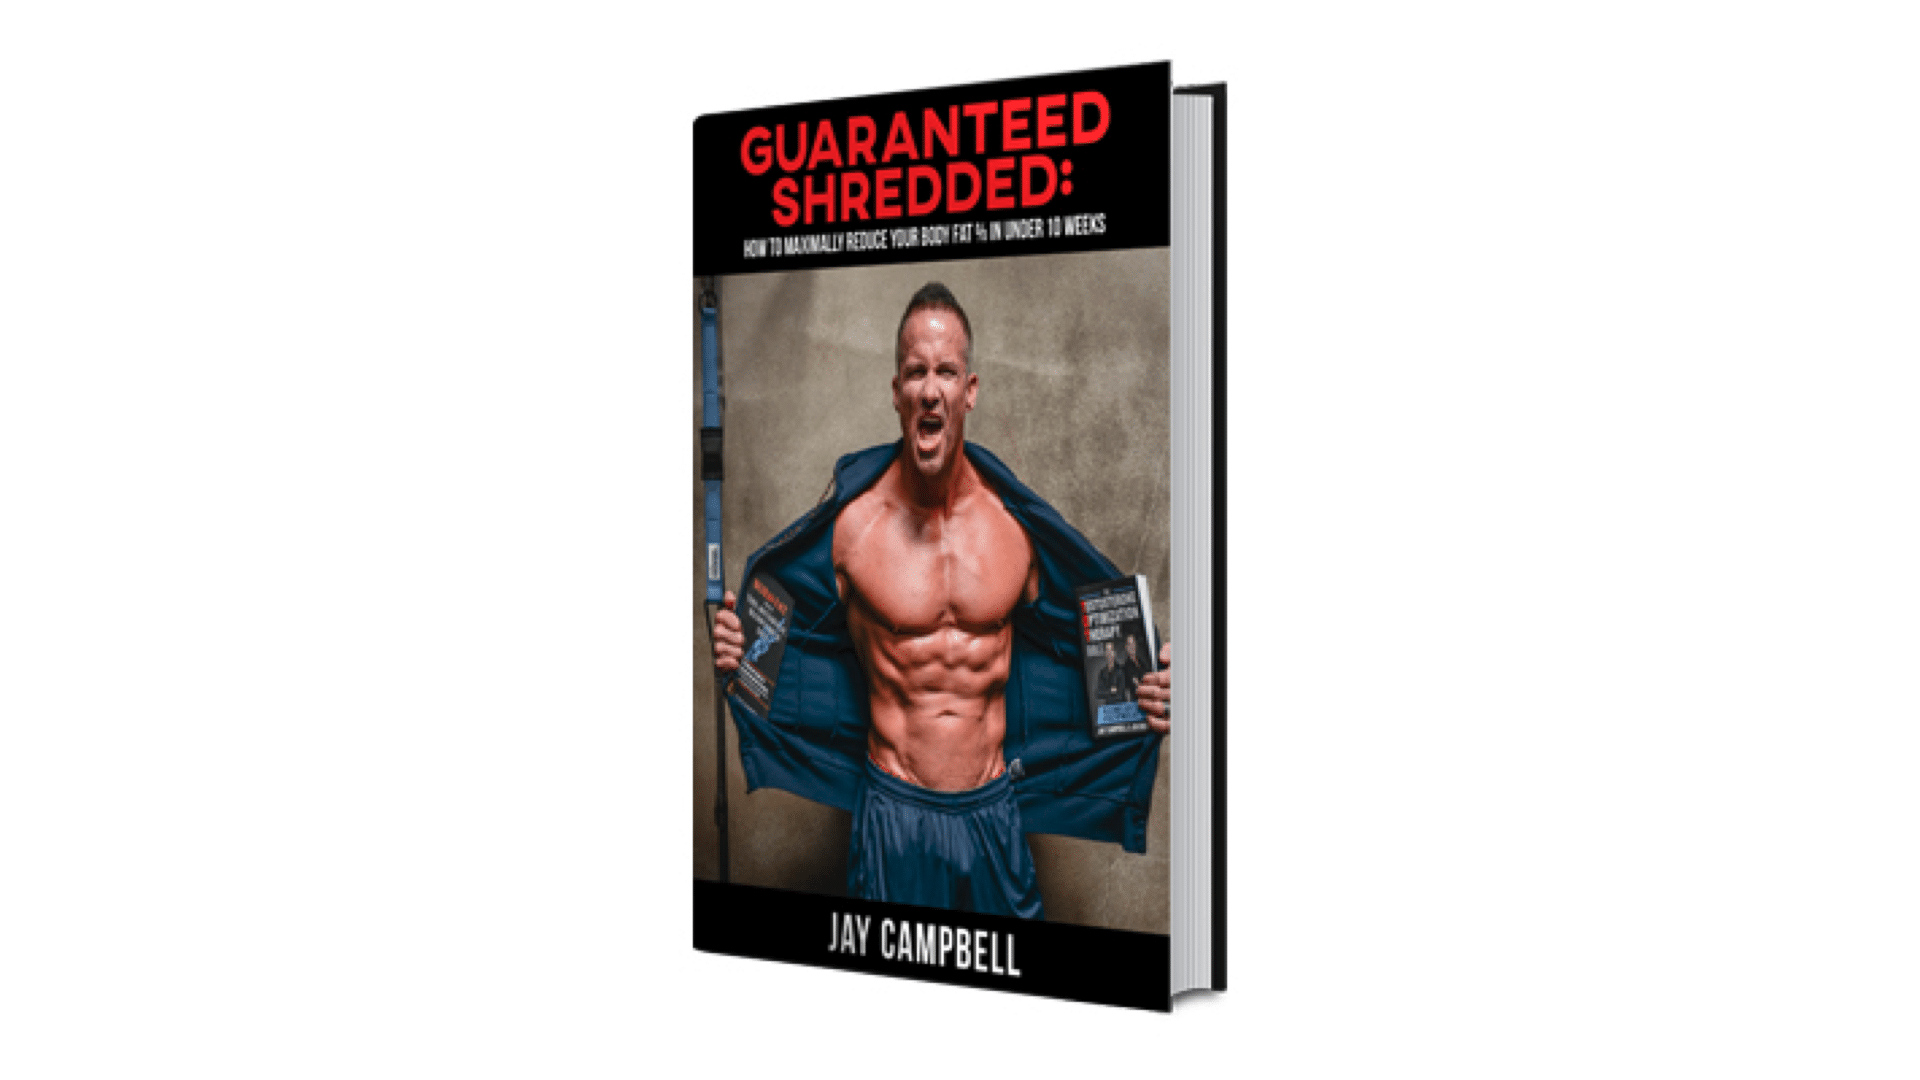 GUARANTEED SHREDDED: How To Maximally Reduce Your Body Fat As Fast (And Safely) As Humanly Possible